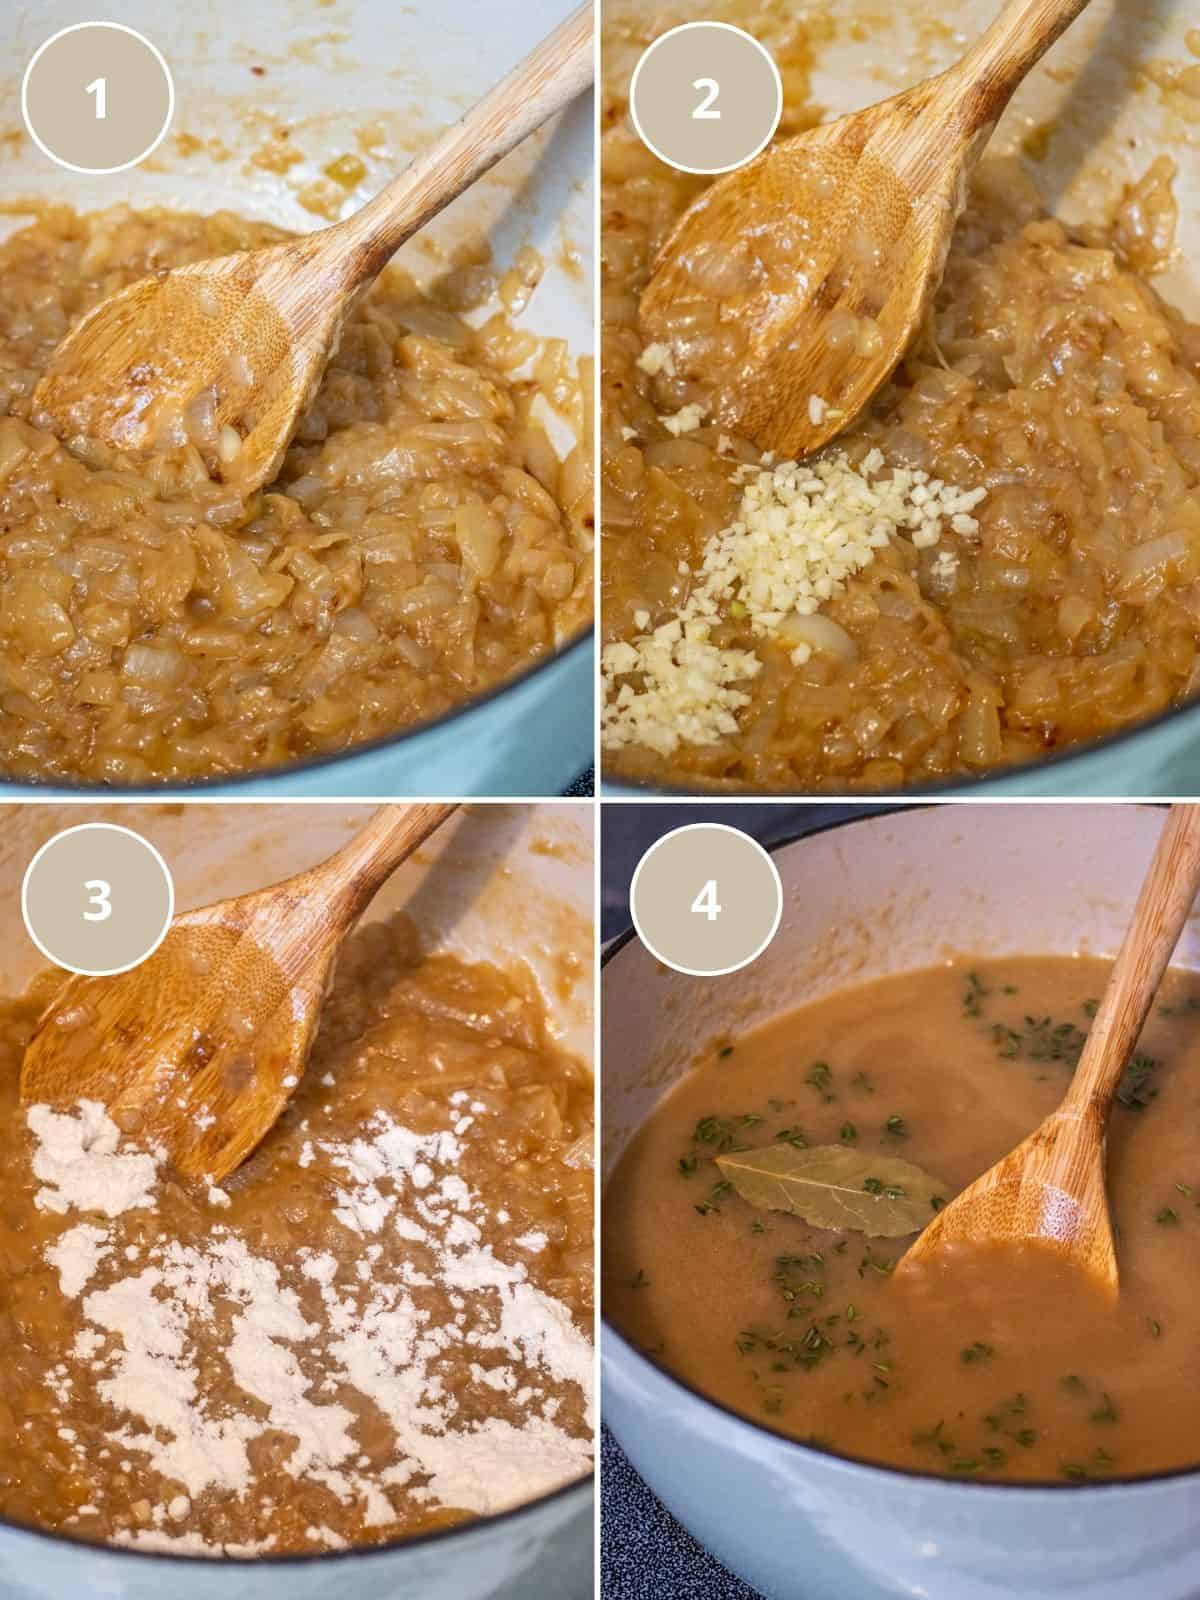 Four part grid showing the steps of caramelizing the onions, adding the garlic, adding the flour, and then adding the broth and seasonings.